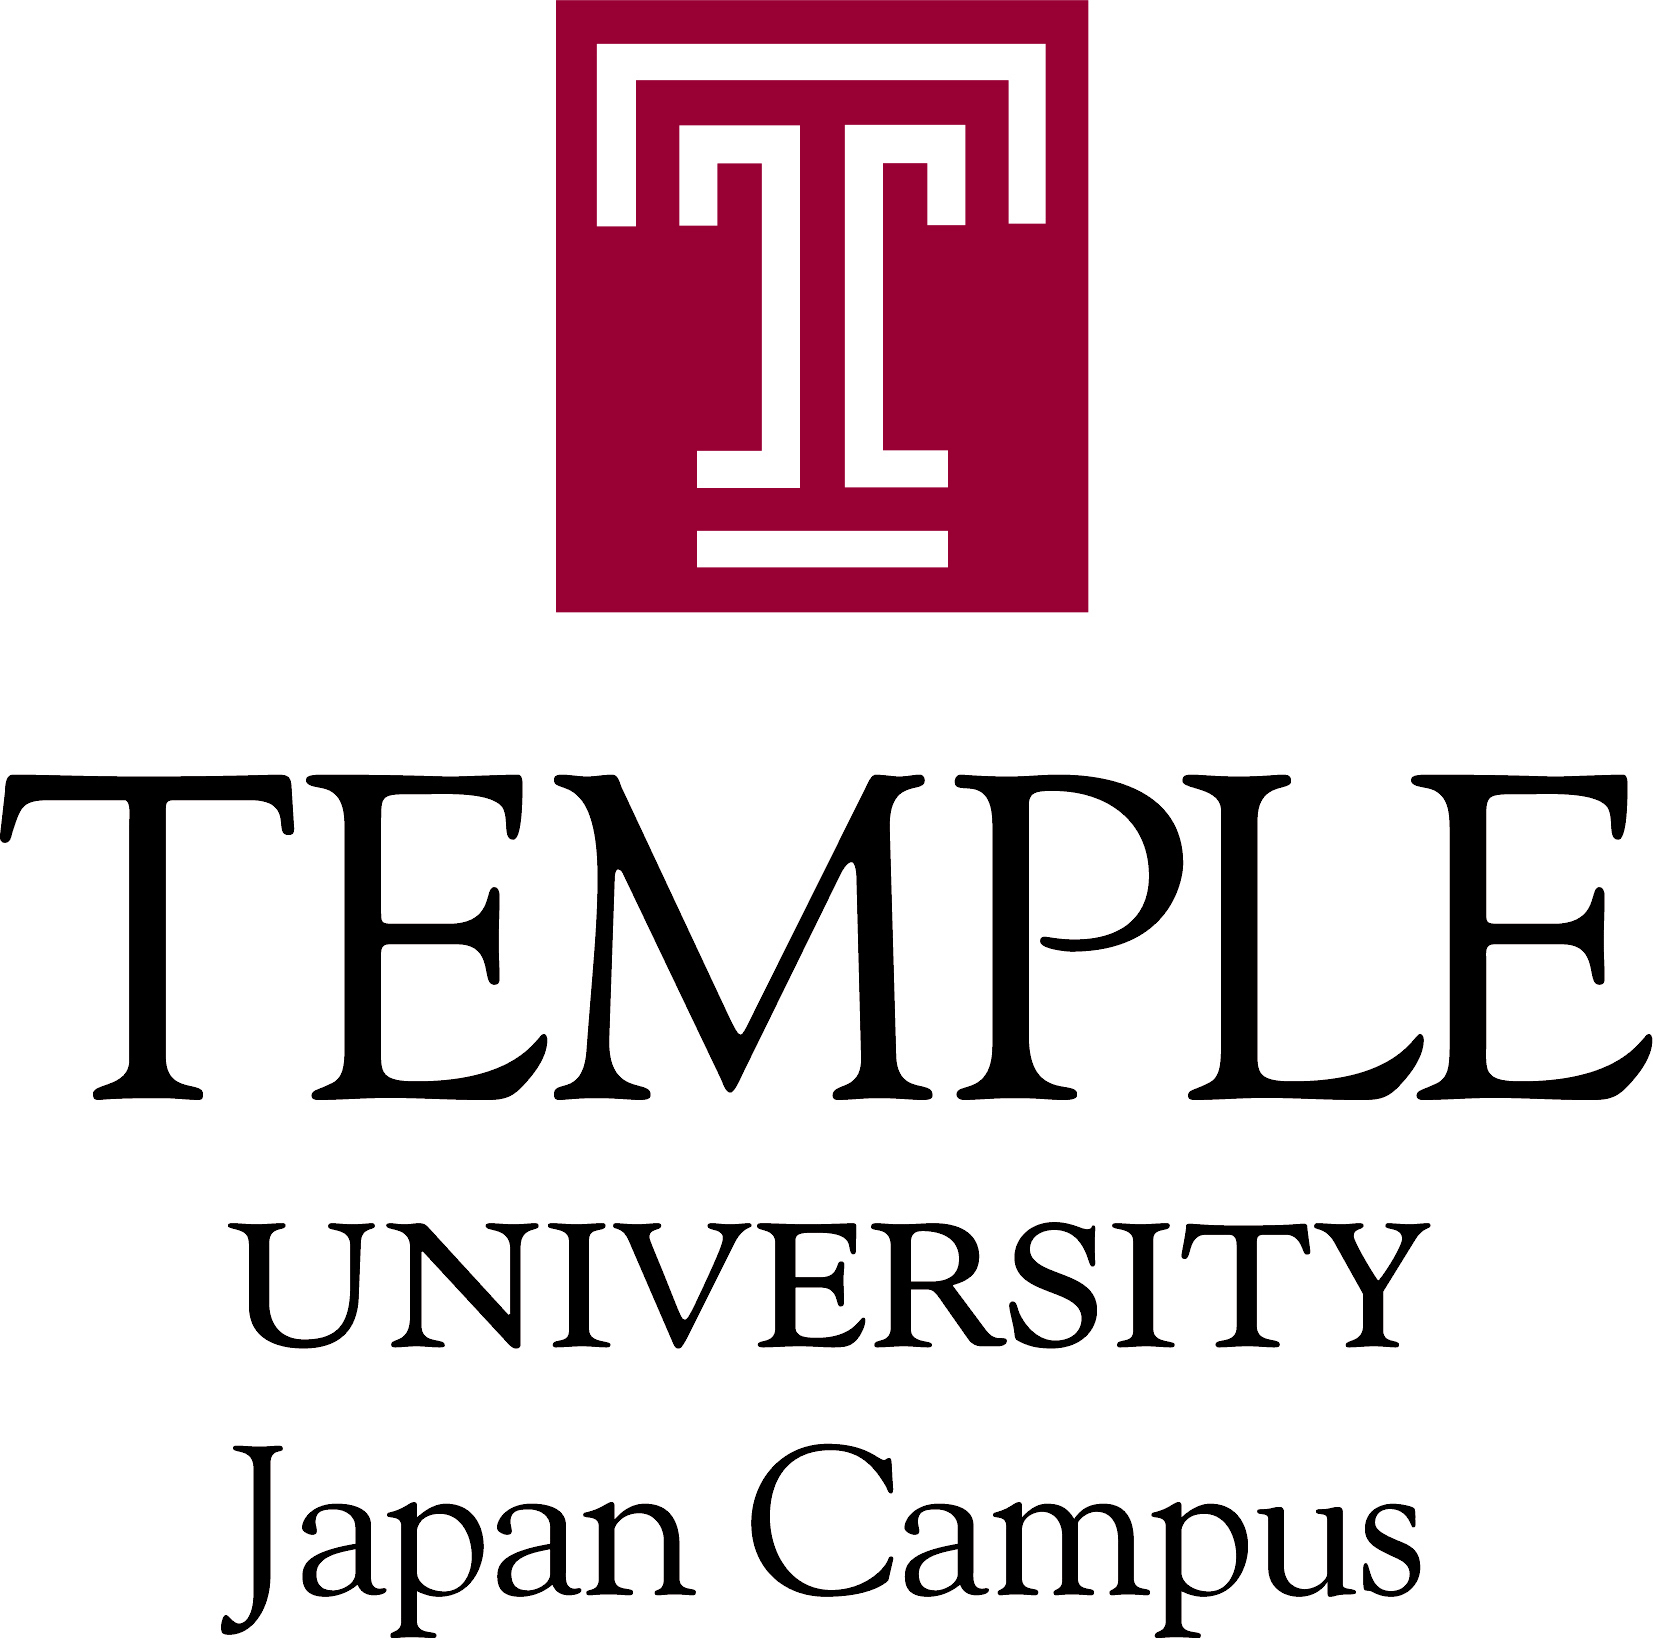 temple university logo | Logospike.com: Famous and Free Vector Logos